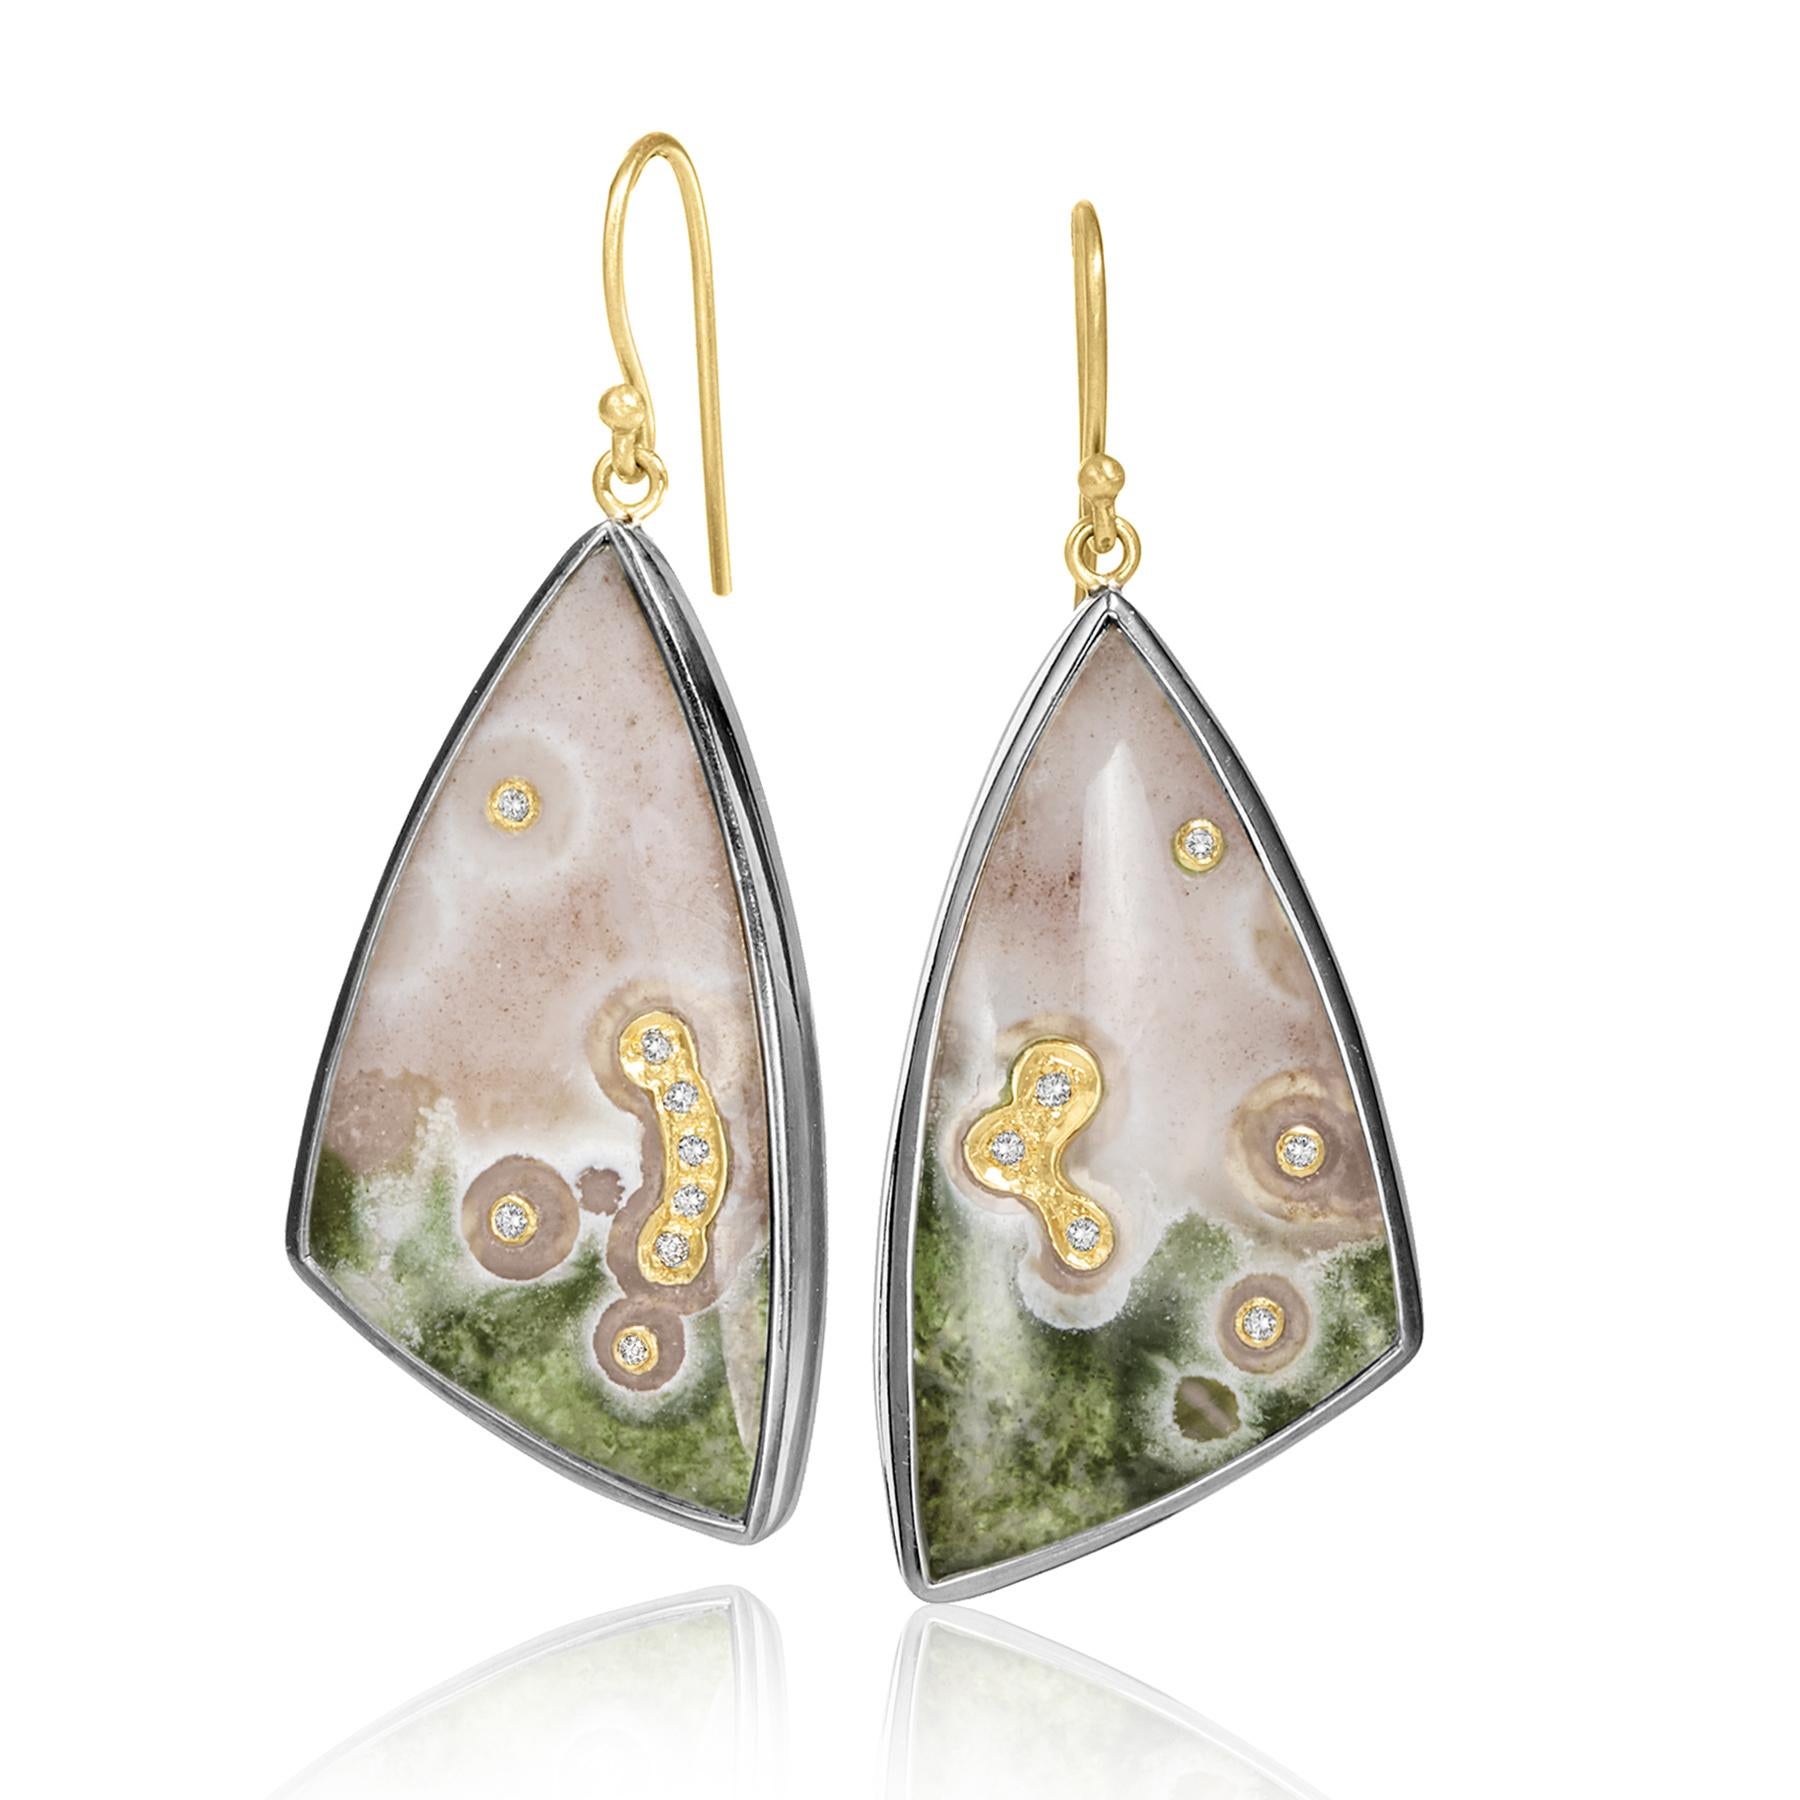 One of a Kind Drop Earrings handcrafted by jewelry designer Tej Kothari featuring a stunning matched pair of ocean jasper showcasing watermelon pink and green hues set in black-rhodium sterling silver embedded with 0.07 total carats of brilliant-cut